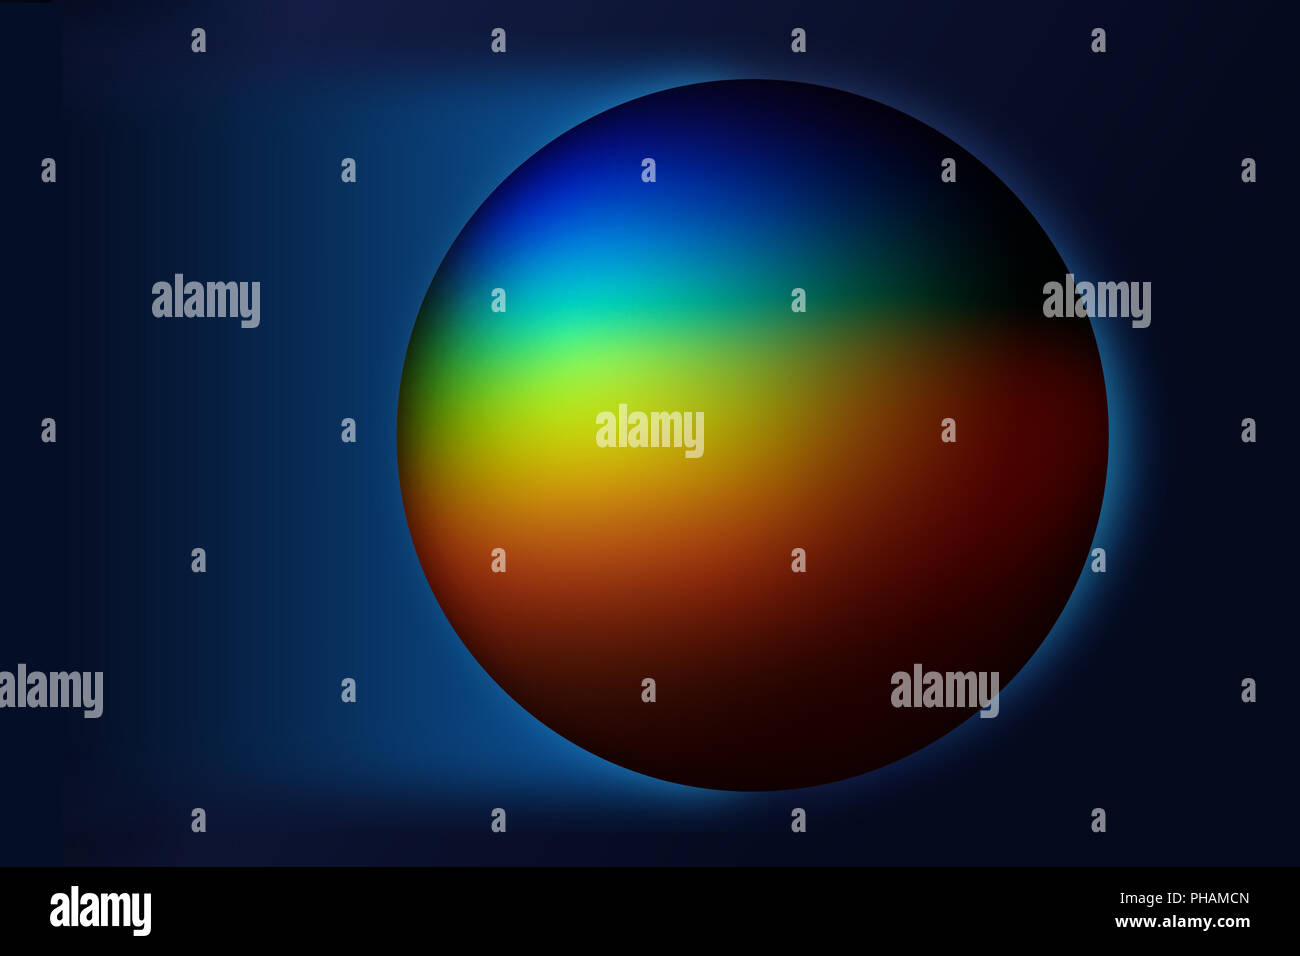 Spectral colors on a sphere Stock Photo